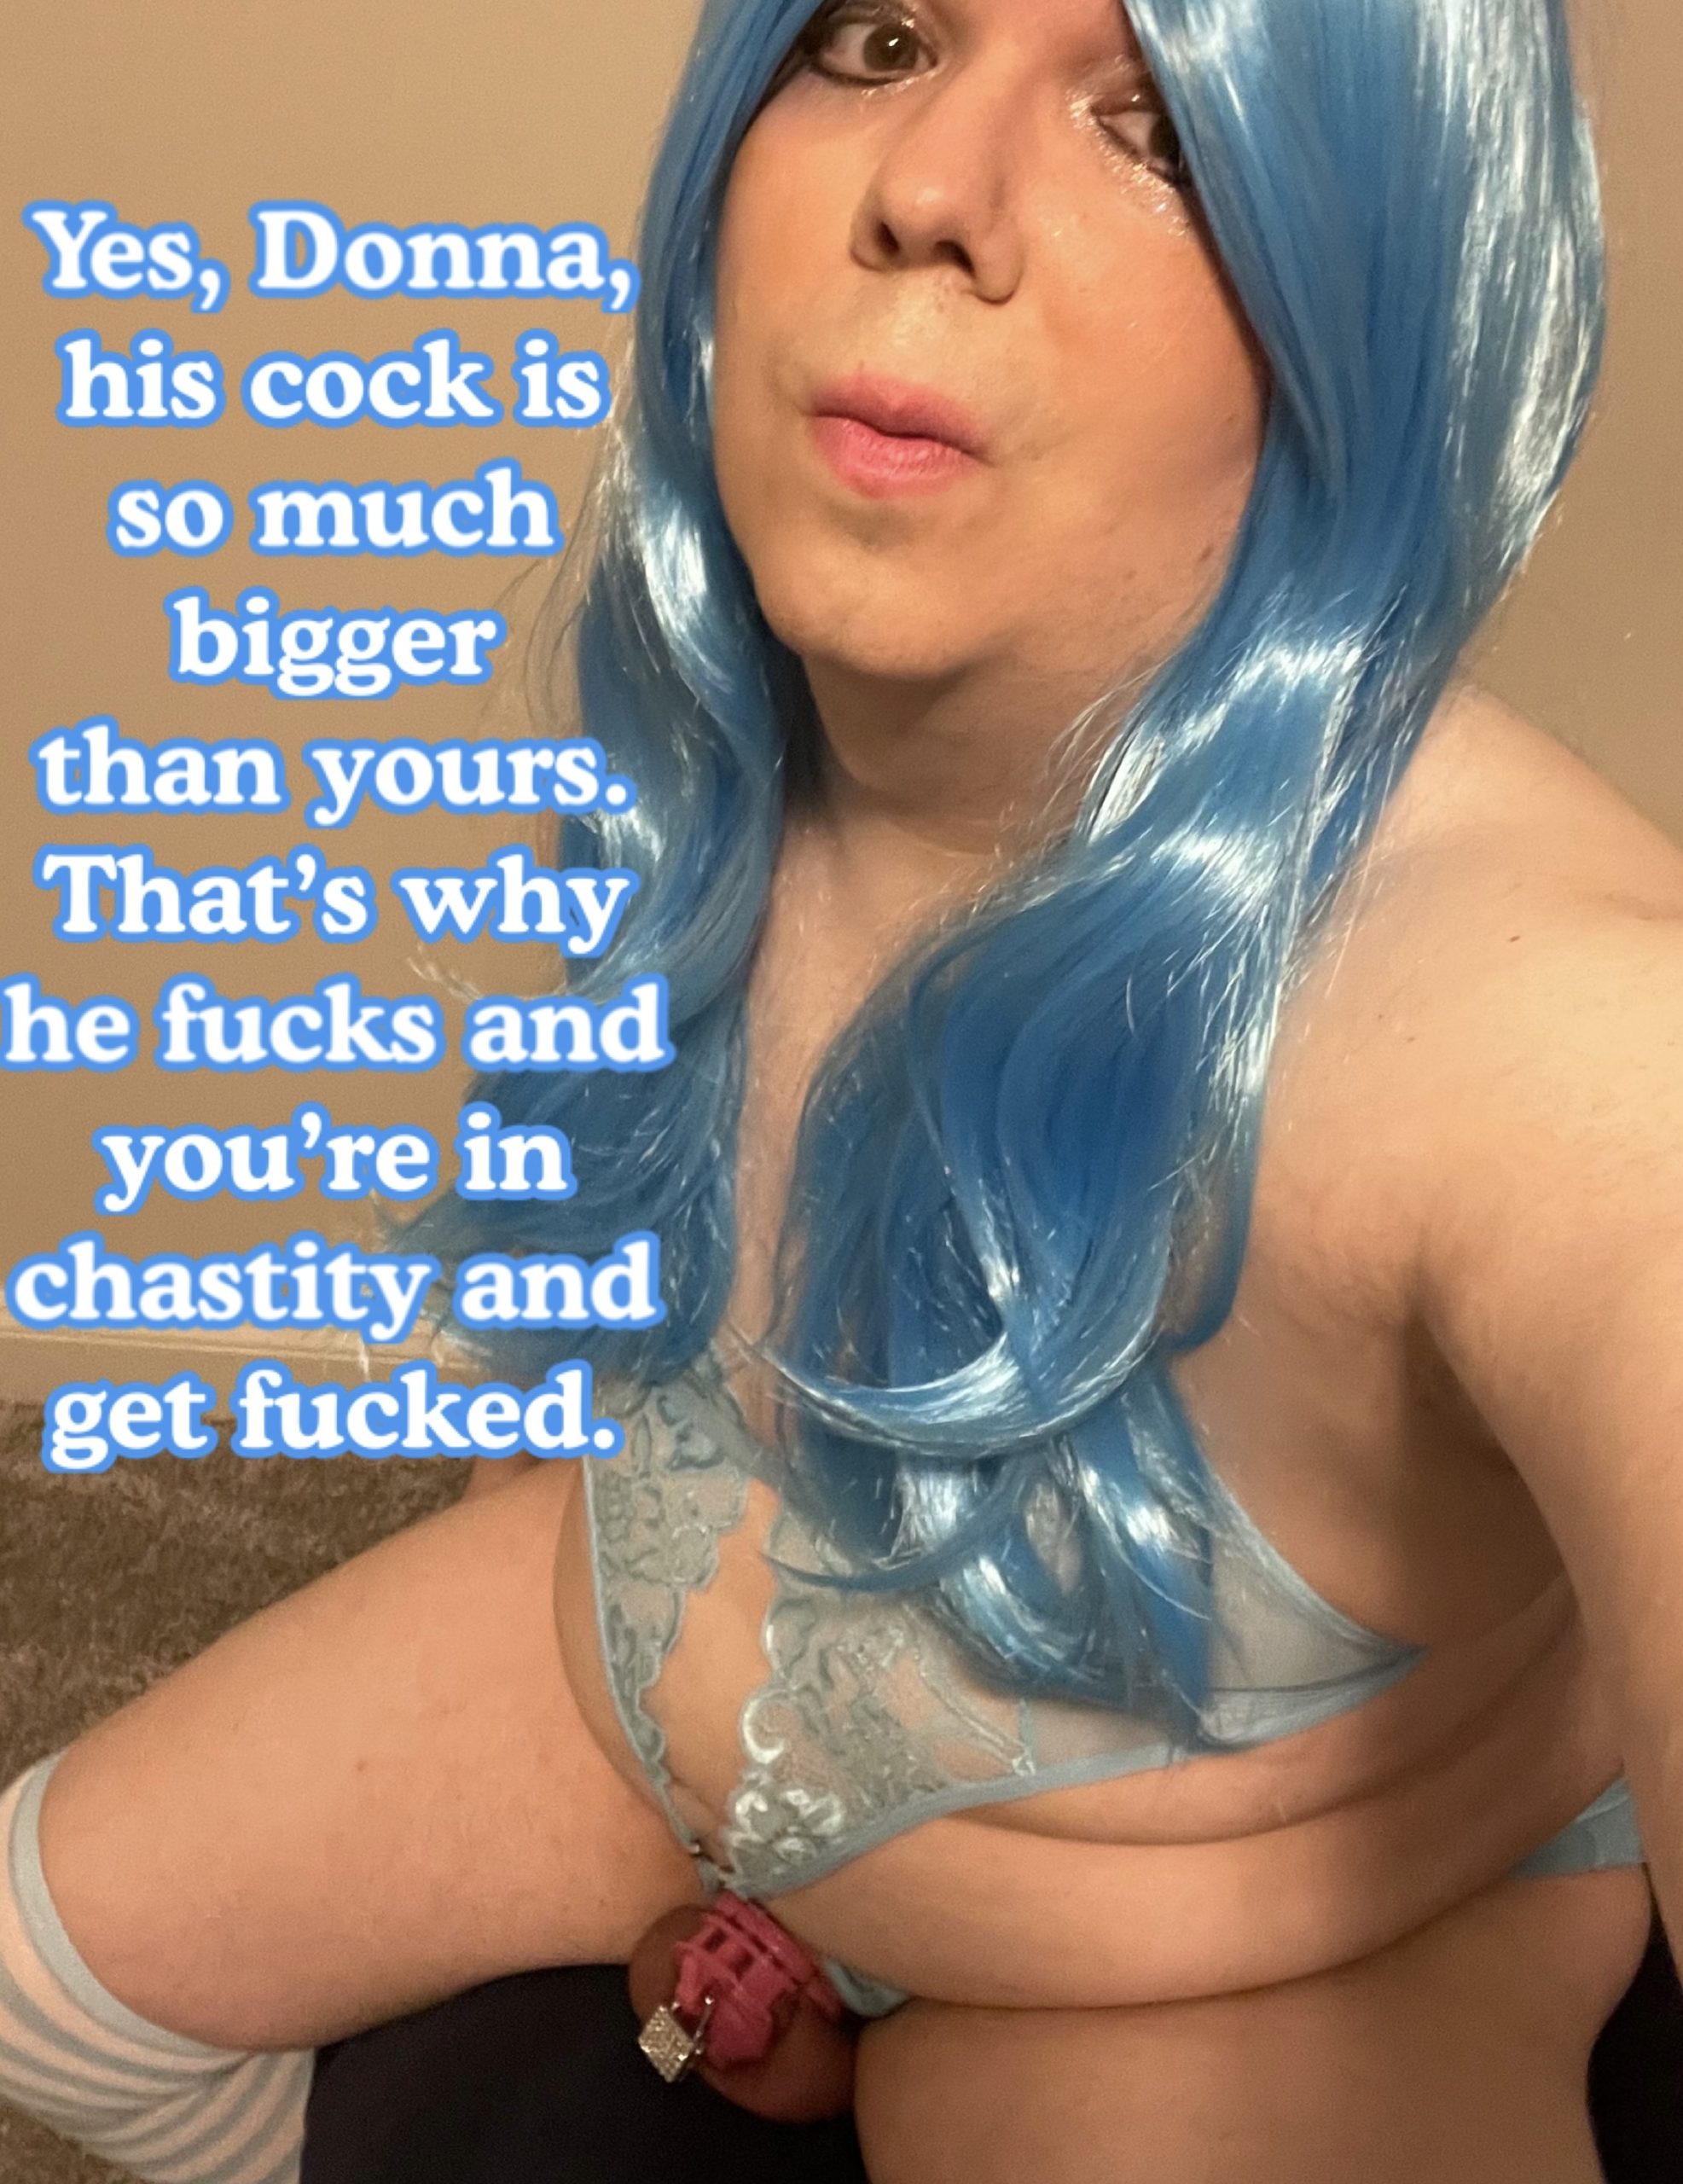 Download, extend, and expose this pathetic sissy princess